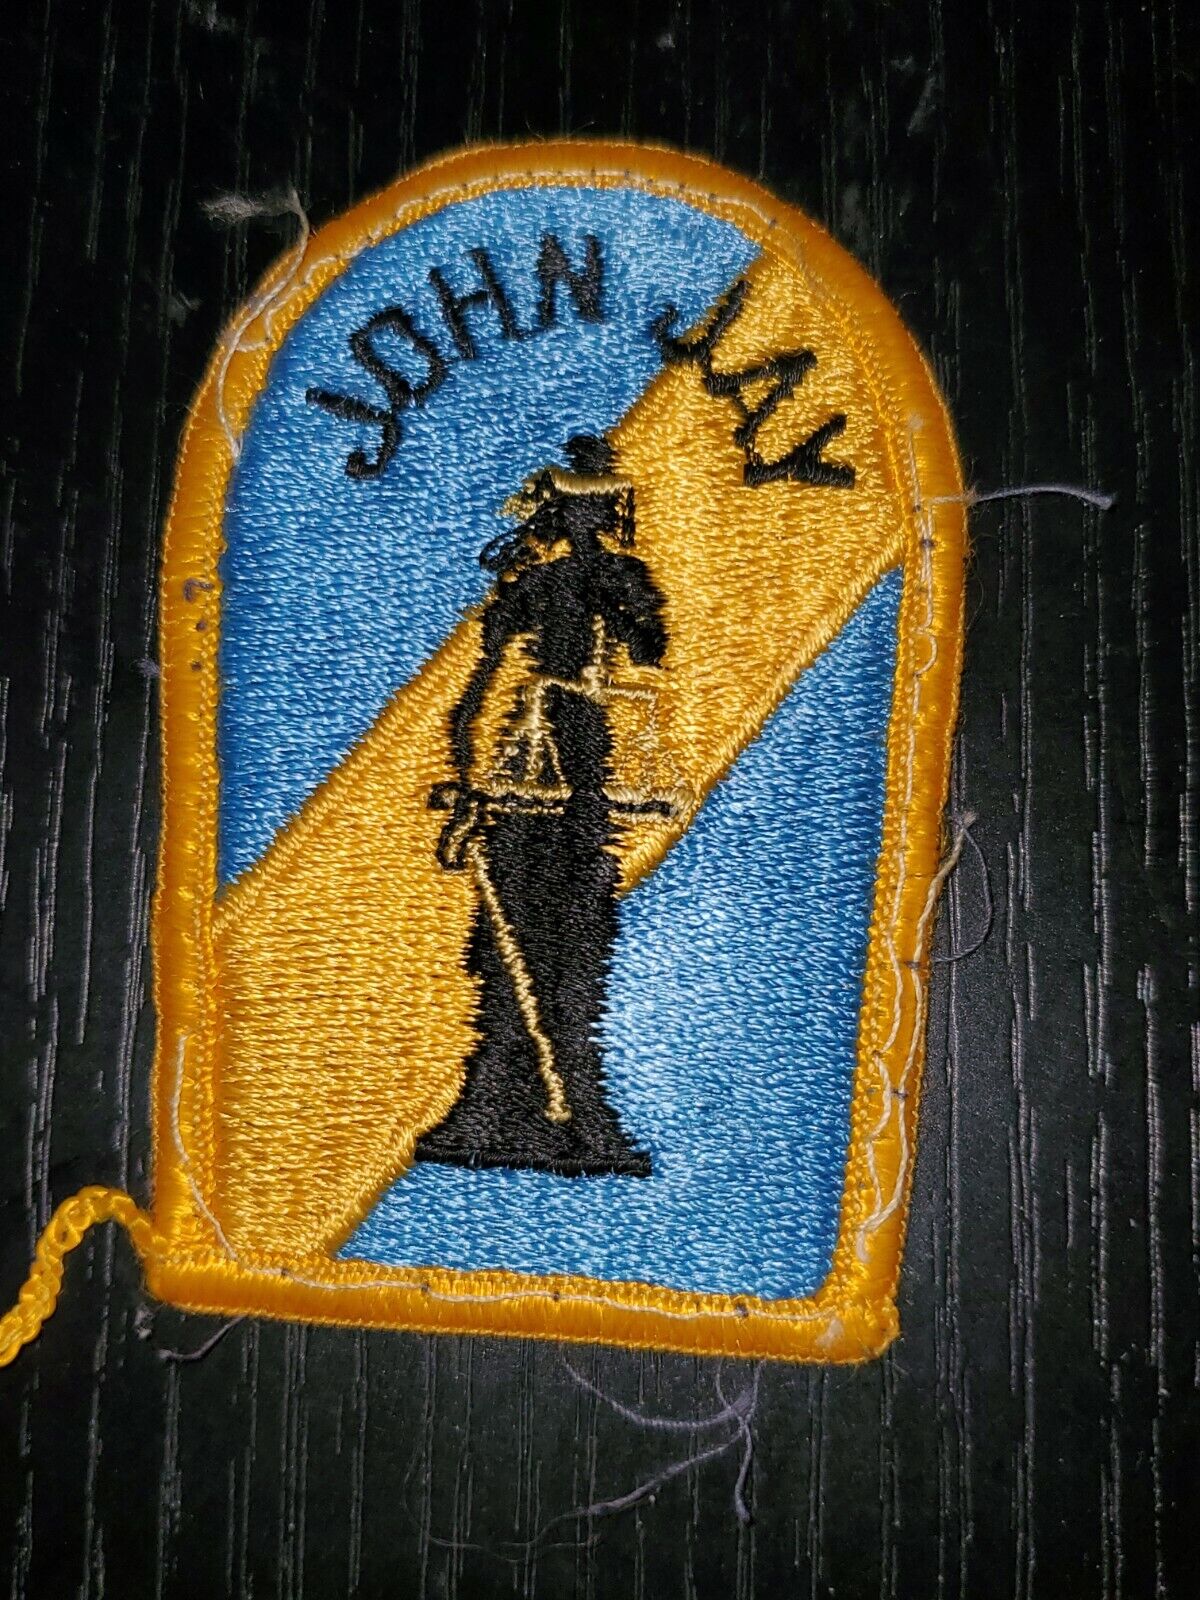 WWII US Army John Jay NYC NY State National Guard OCS Military Academy Patch 